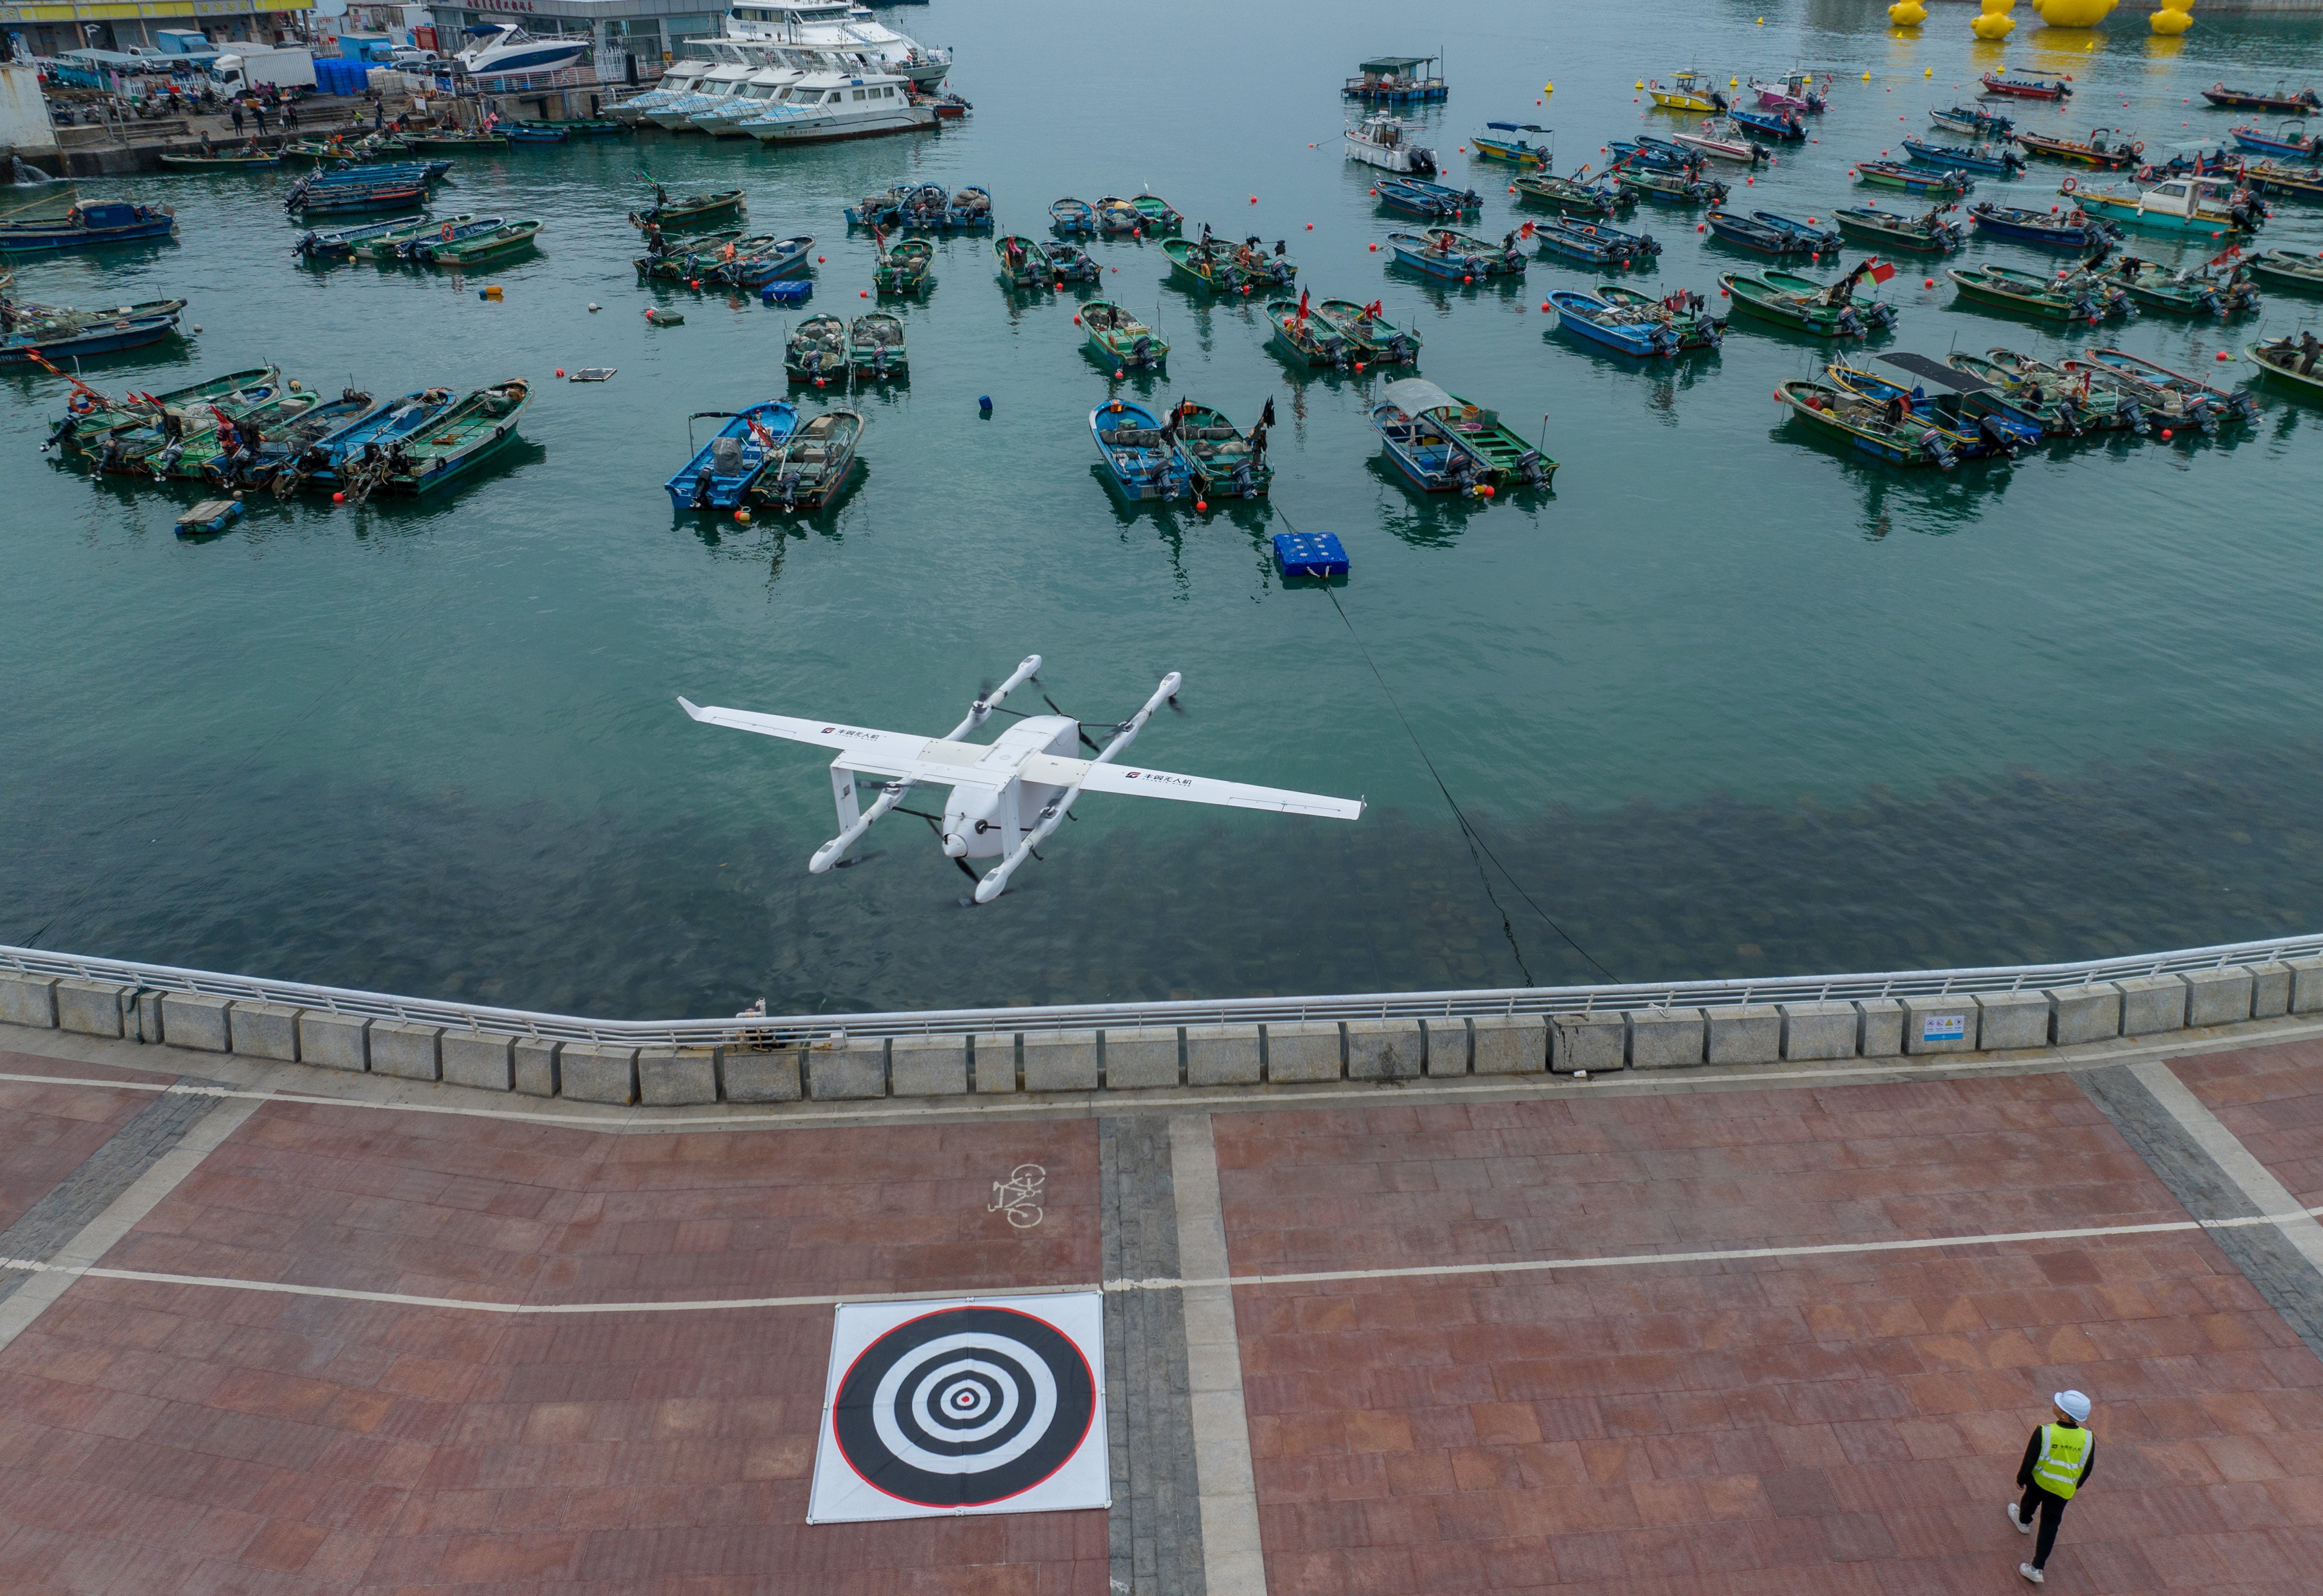 A drone carrying seafood takes off from Nan’ao Shuangyong Pier in Shenzhen on February 5 on an established delivery route to Longgang district. It would be sad if Hong Kong’s lack of low-altitude economic policies and supporting facilities cause drone deliveries and flying taxis to stop at the Shenzhen river border. Photo: Xinhua